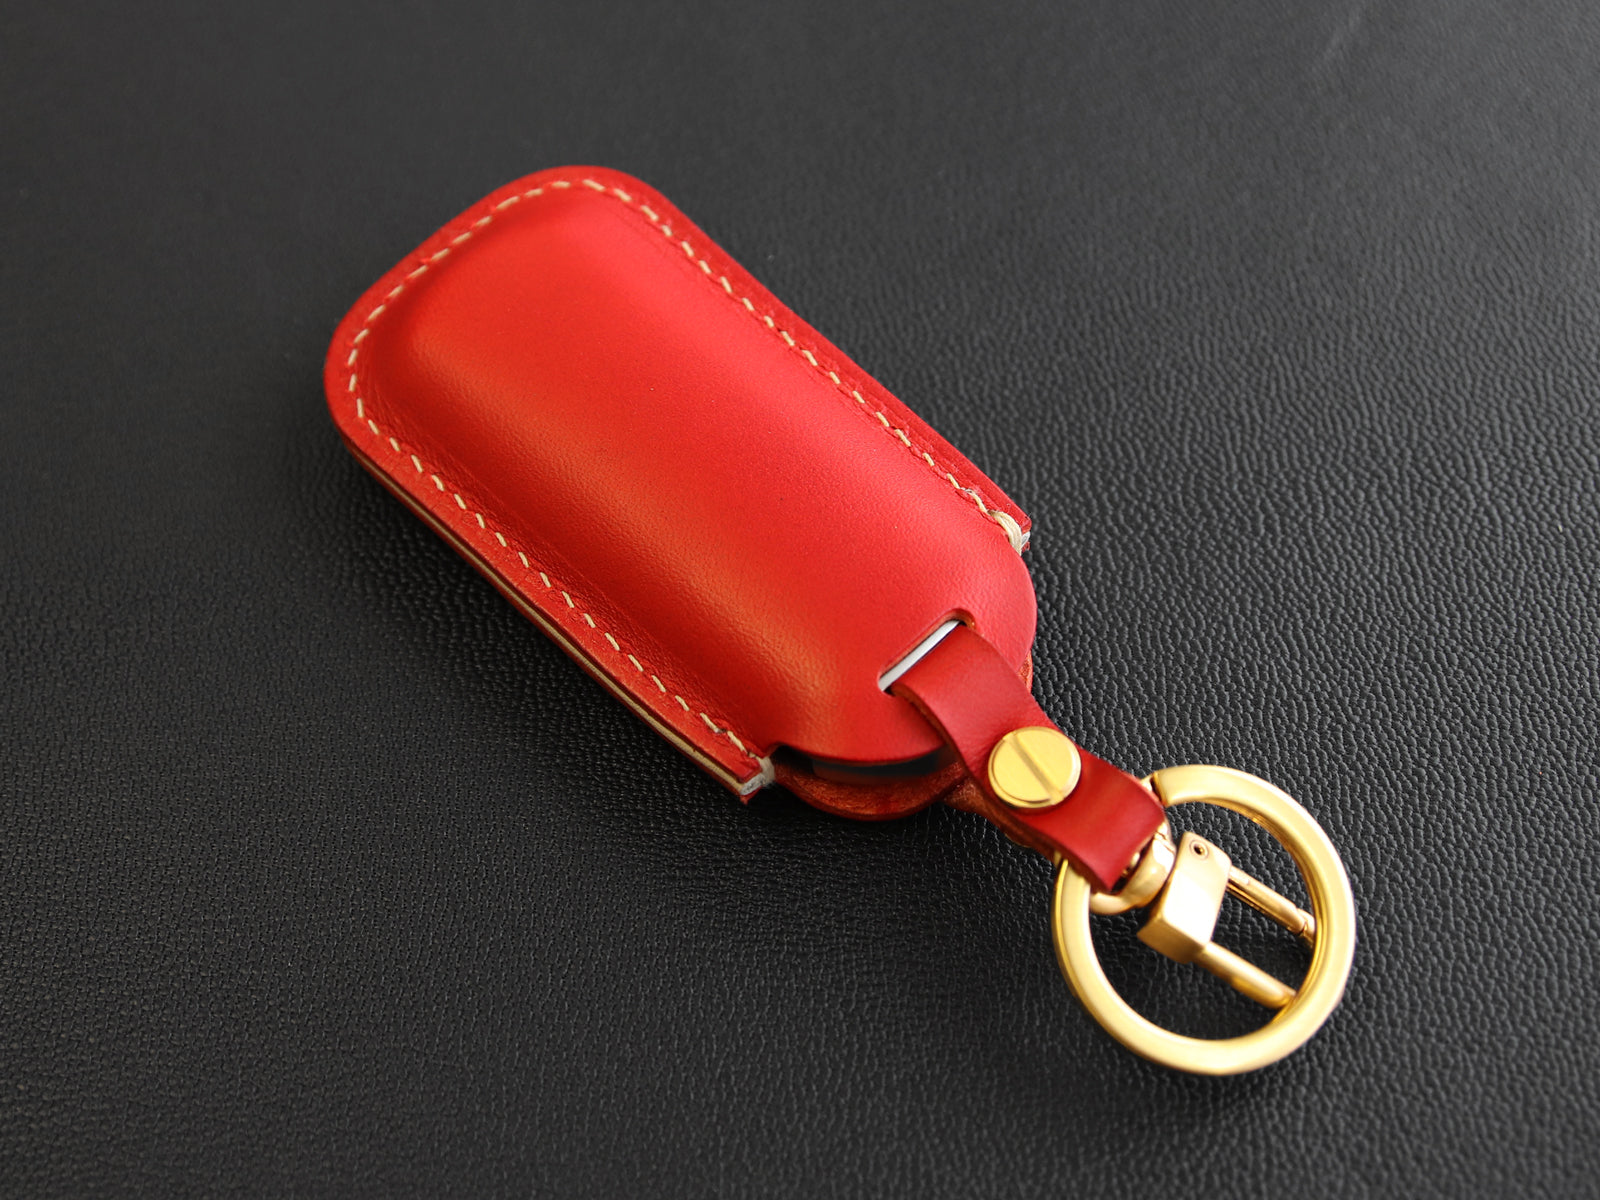 Keycare Italian leather key cover for Compass, Trailhawk 2 button smar